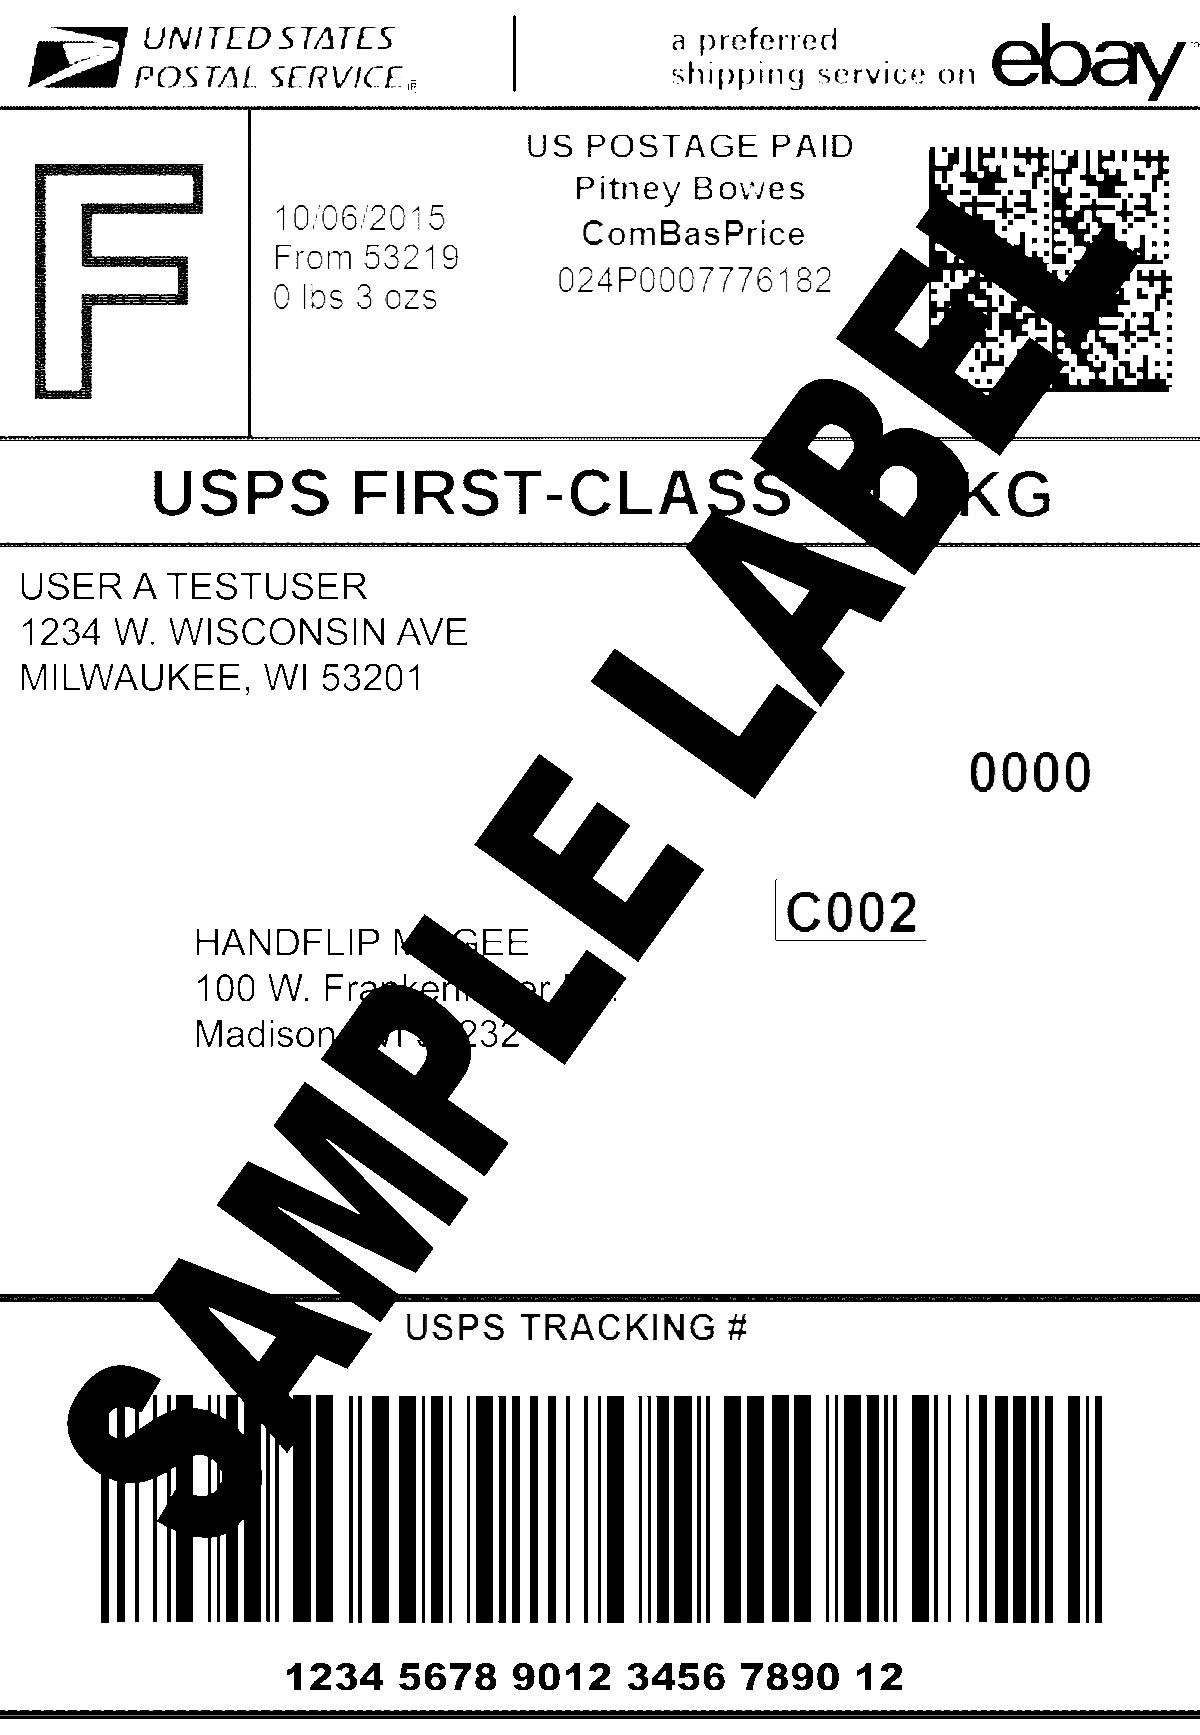 Free Printable Shipping Labels